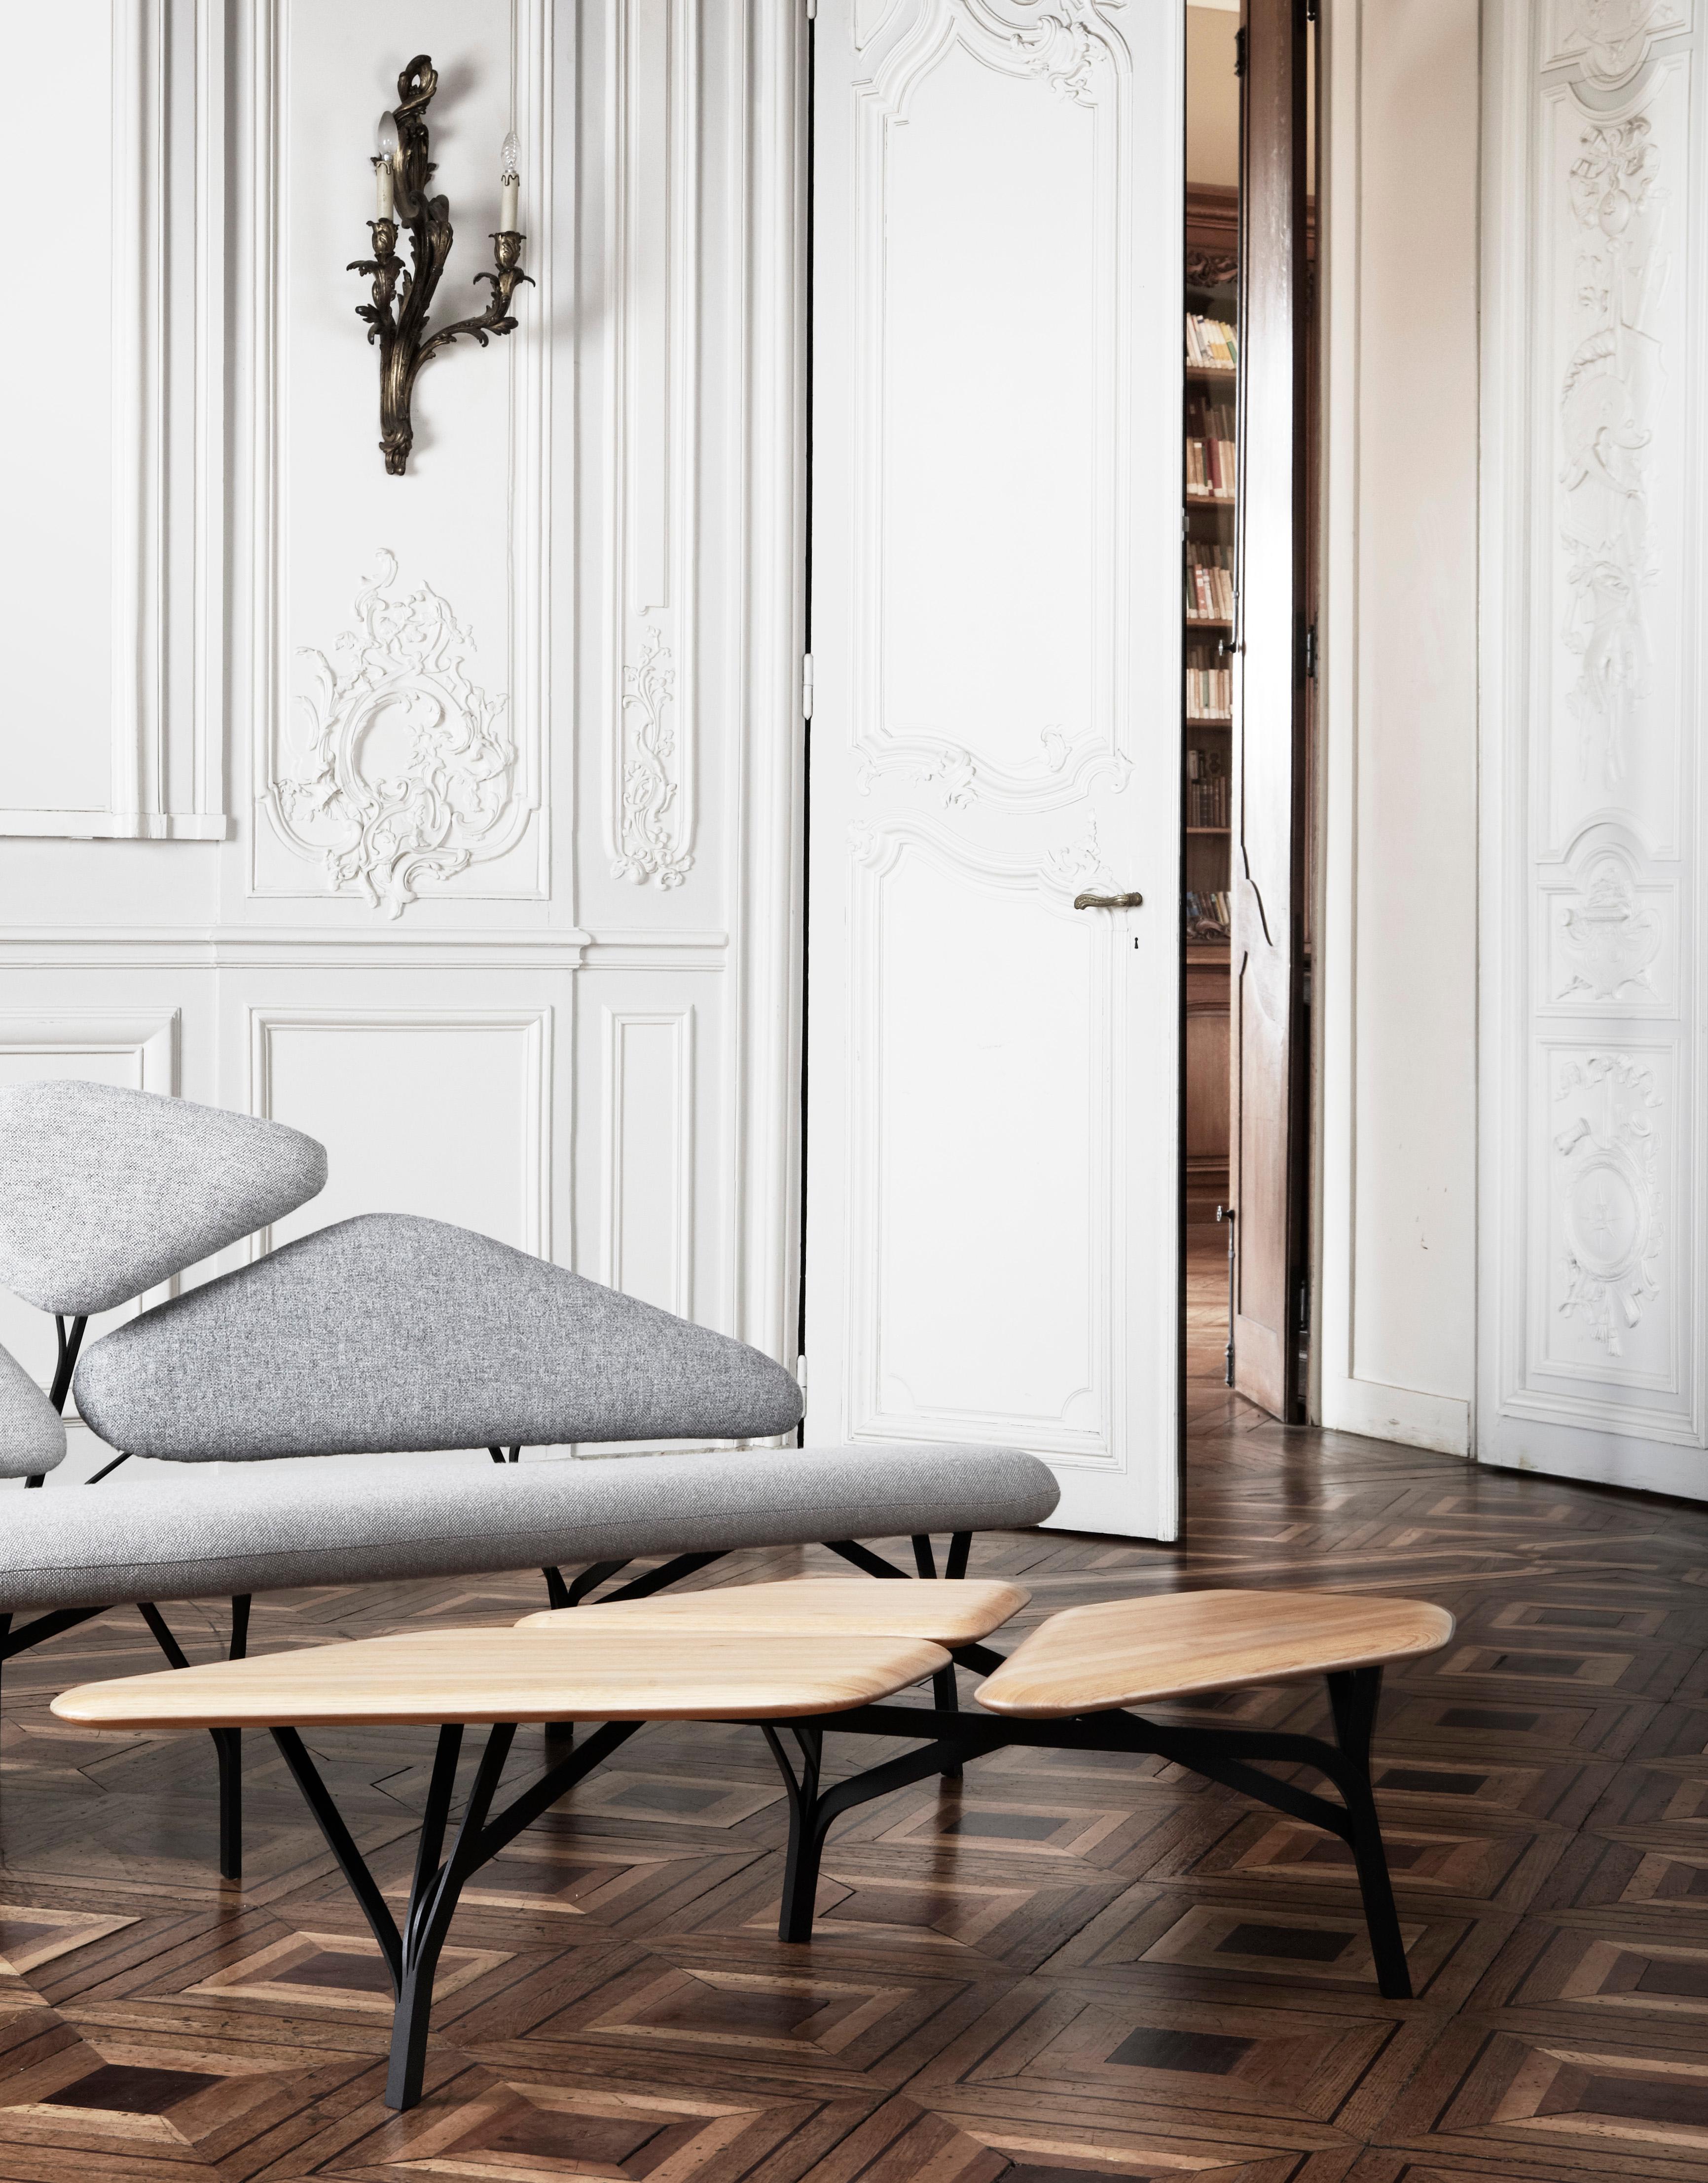 The Borghese table, as the eponymous sofa, is inspired by the umbrella pines at the Villa Borghese gardens in Rome.
The characteristic network of branches is translated as a graphic steel framework supporting a trio of solid wood tops.
The